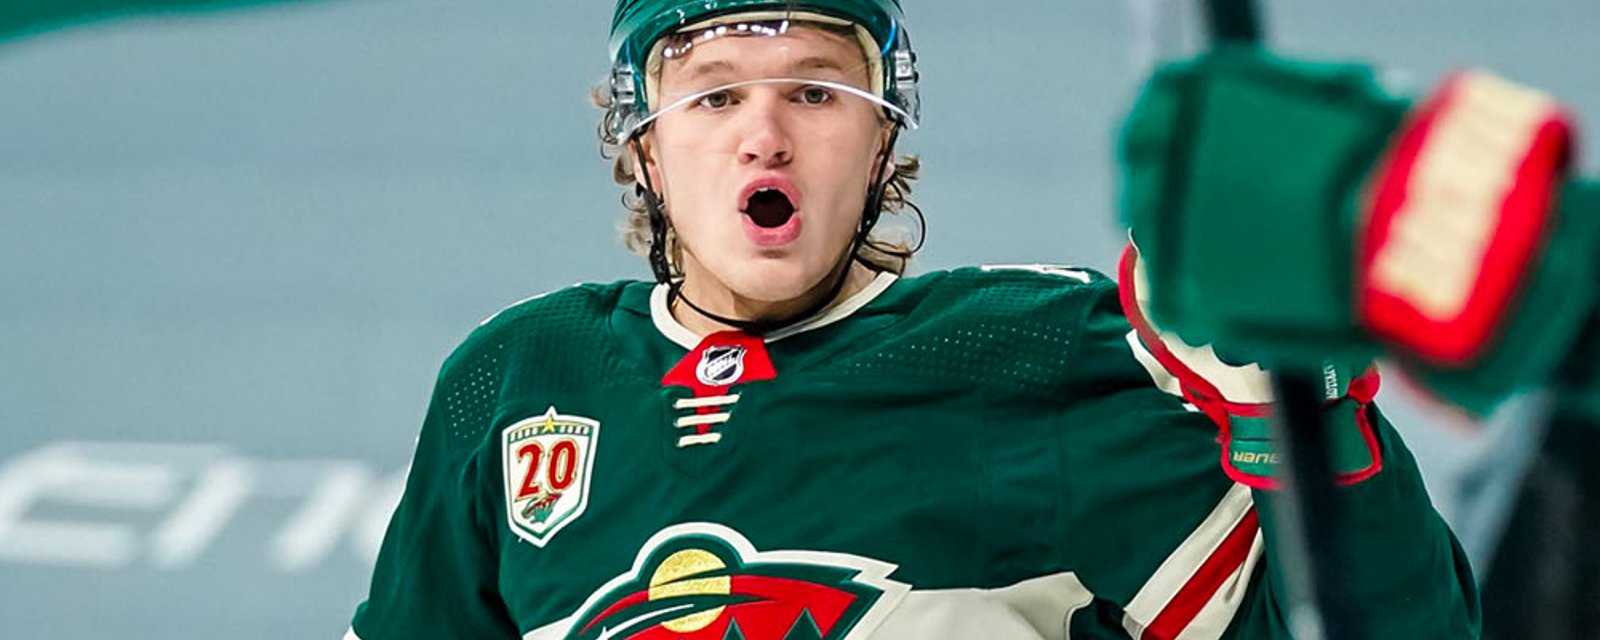 Report: Kaprizov agrees to terms in KHL while continuing negotiations with Wild